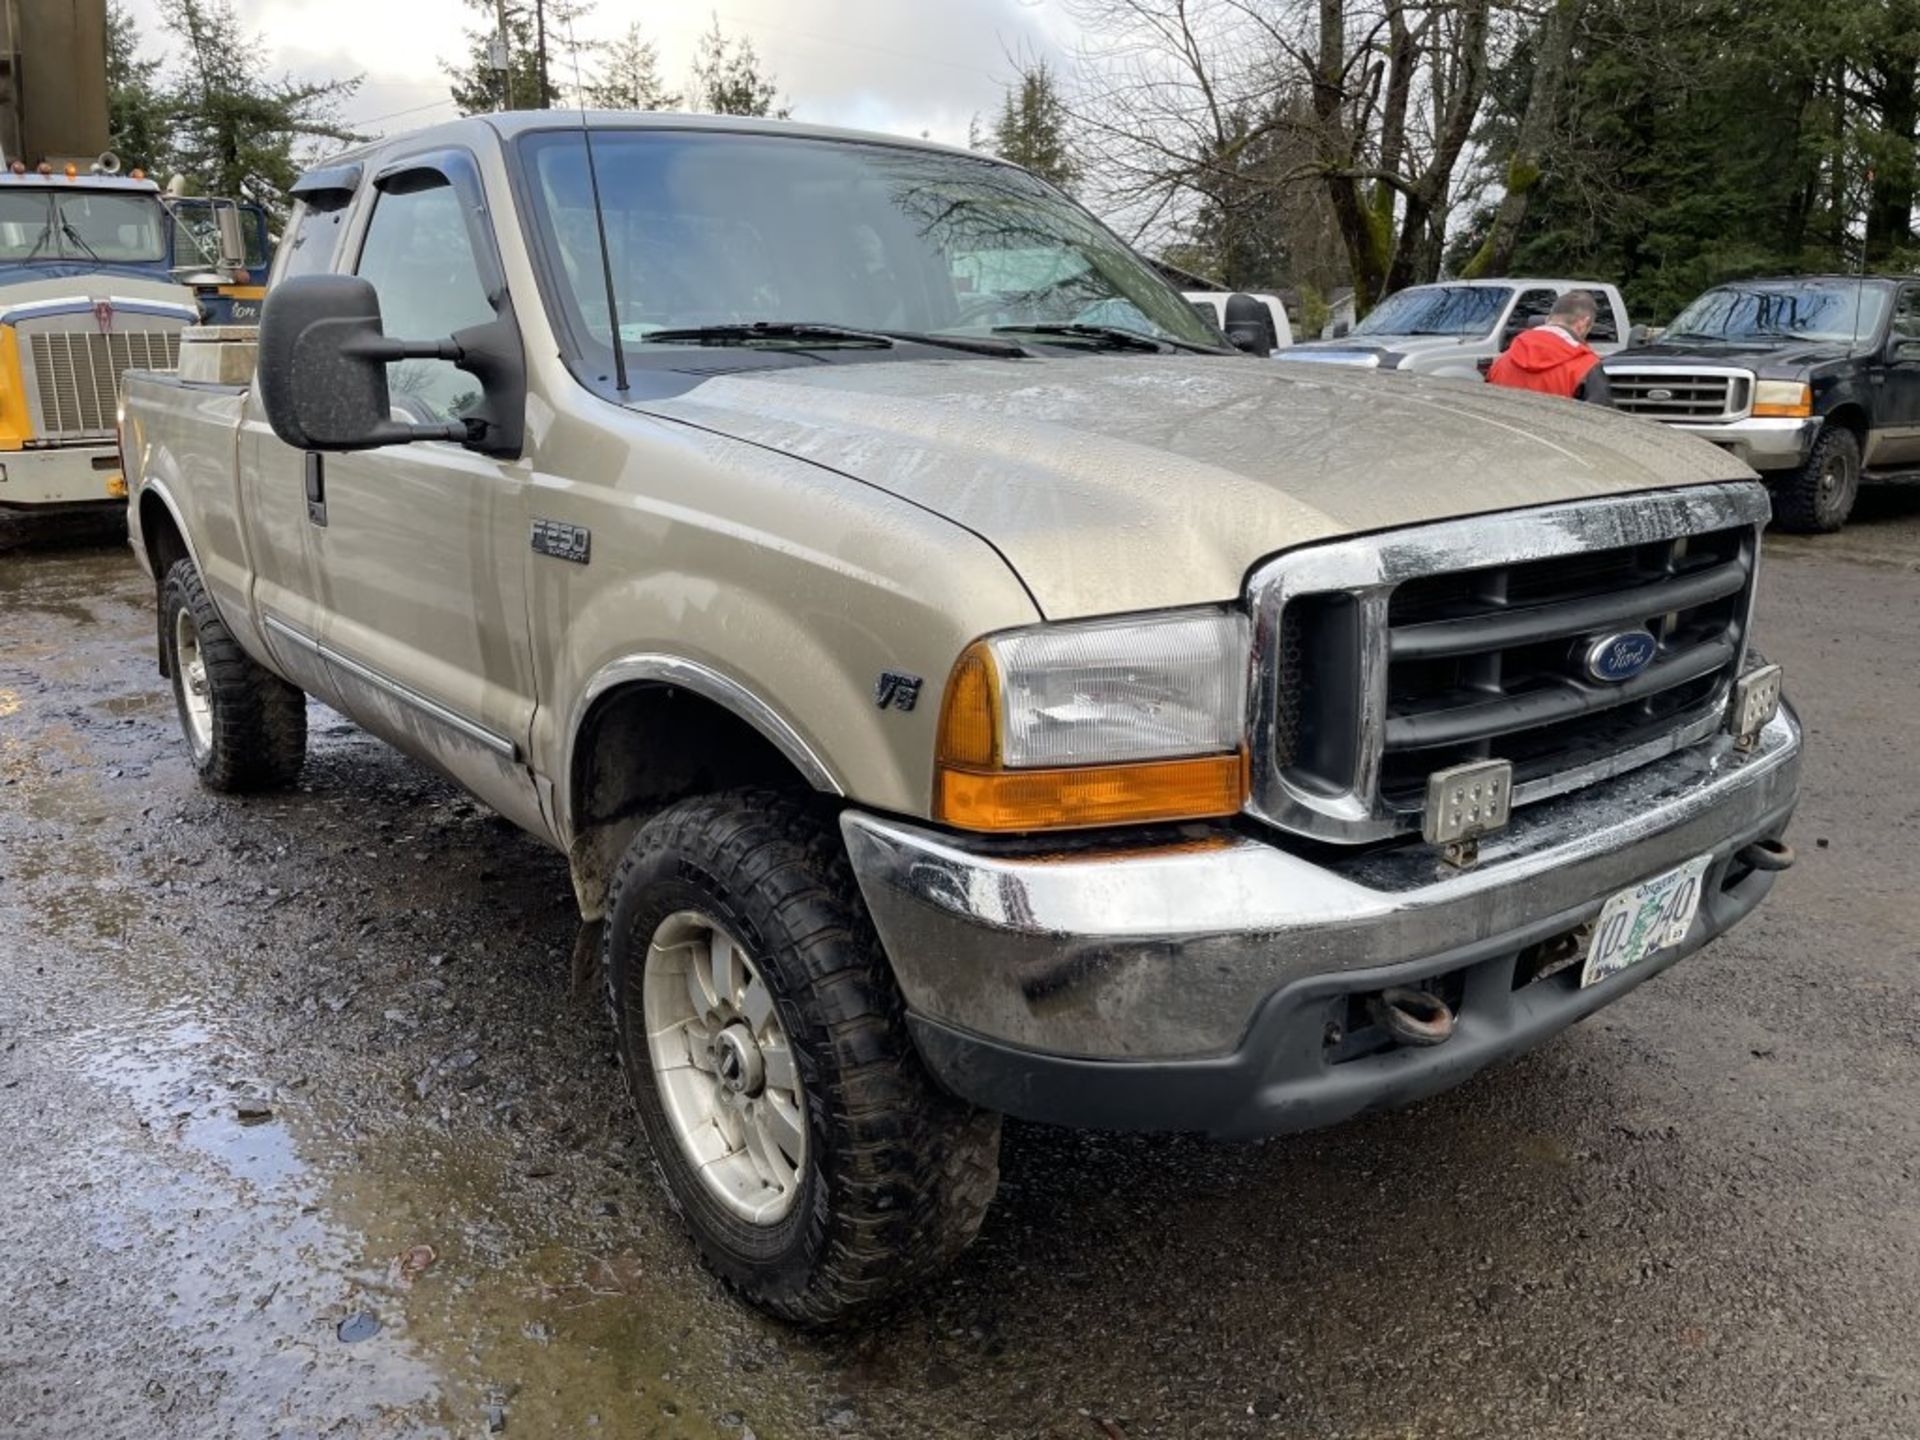 2000 Ford F250 XLT SD 4x4 Extra Cab Pickup - Image 2 of 14